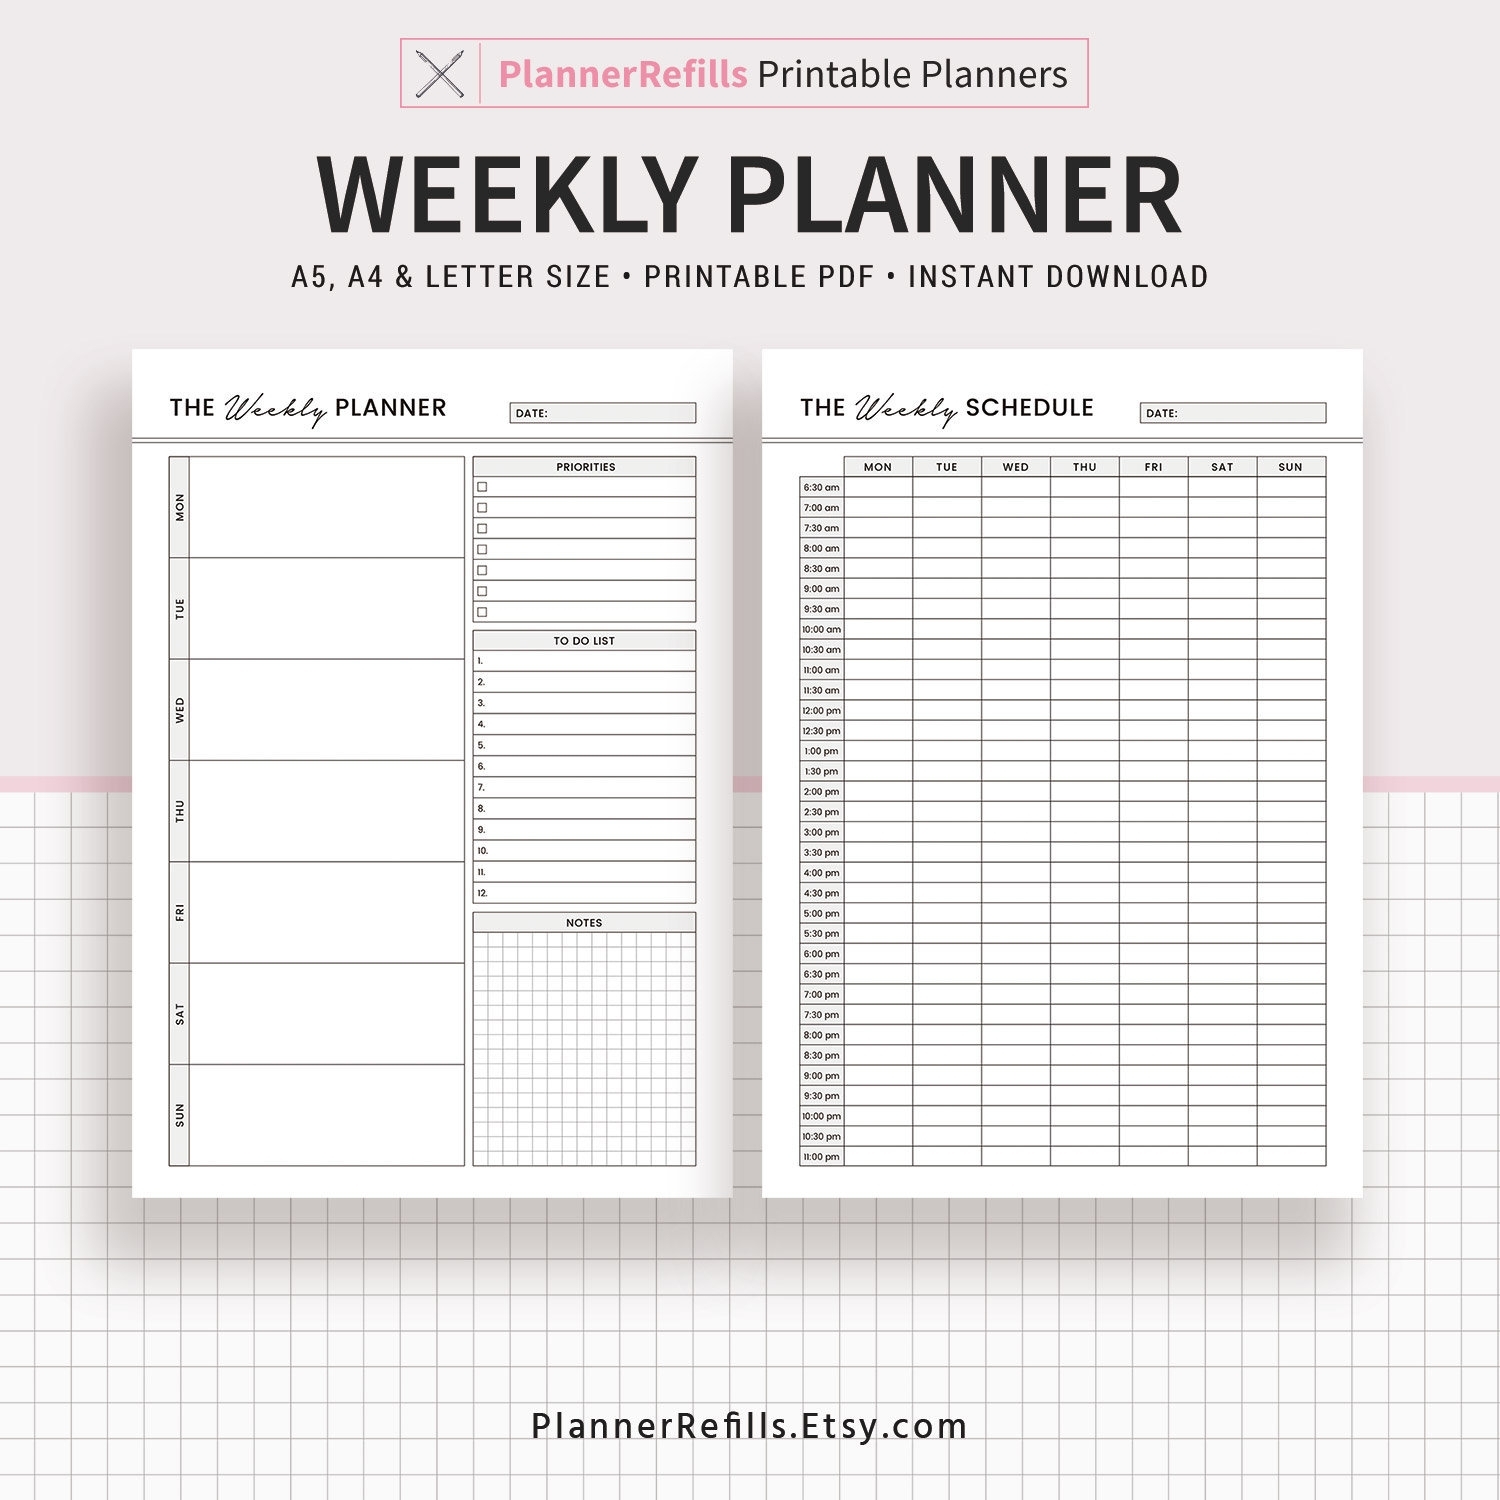 Printable Weekly Planner 2019 Planner Weekly Schedule | Etsy regarding Graphic Organizer For Schedule From Monday To Sunday 5 Am To 9 Pm